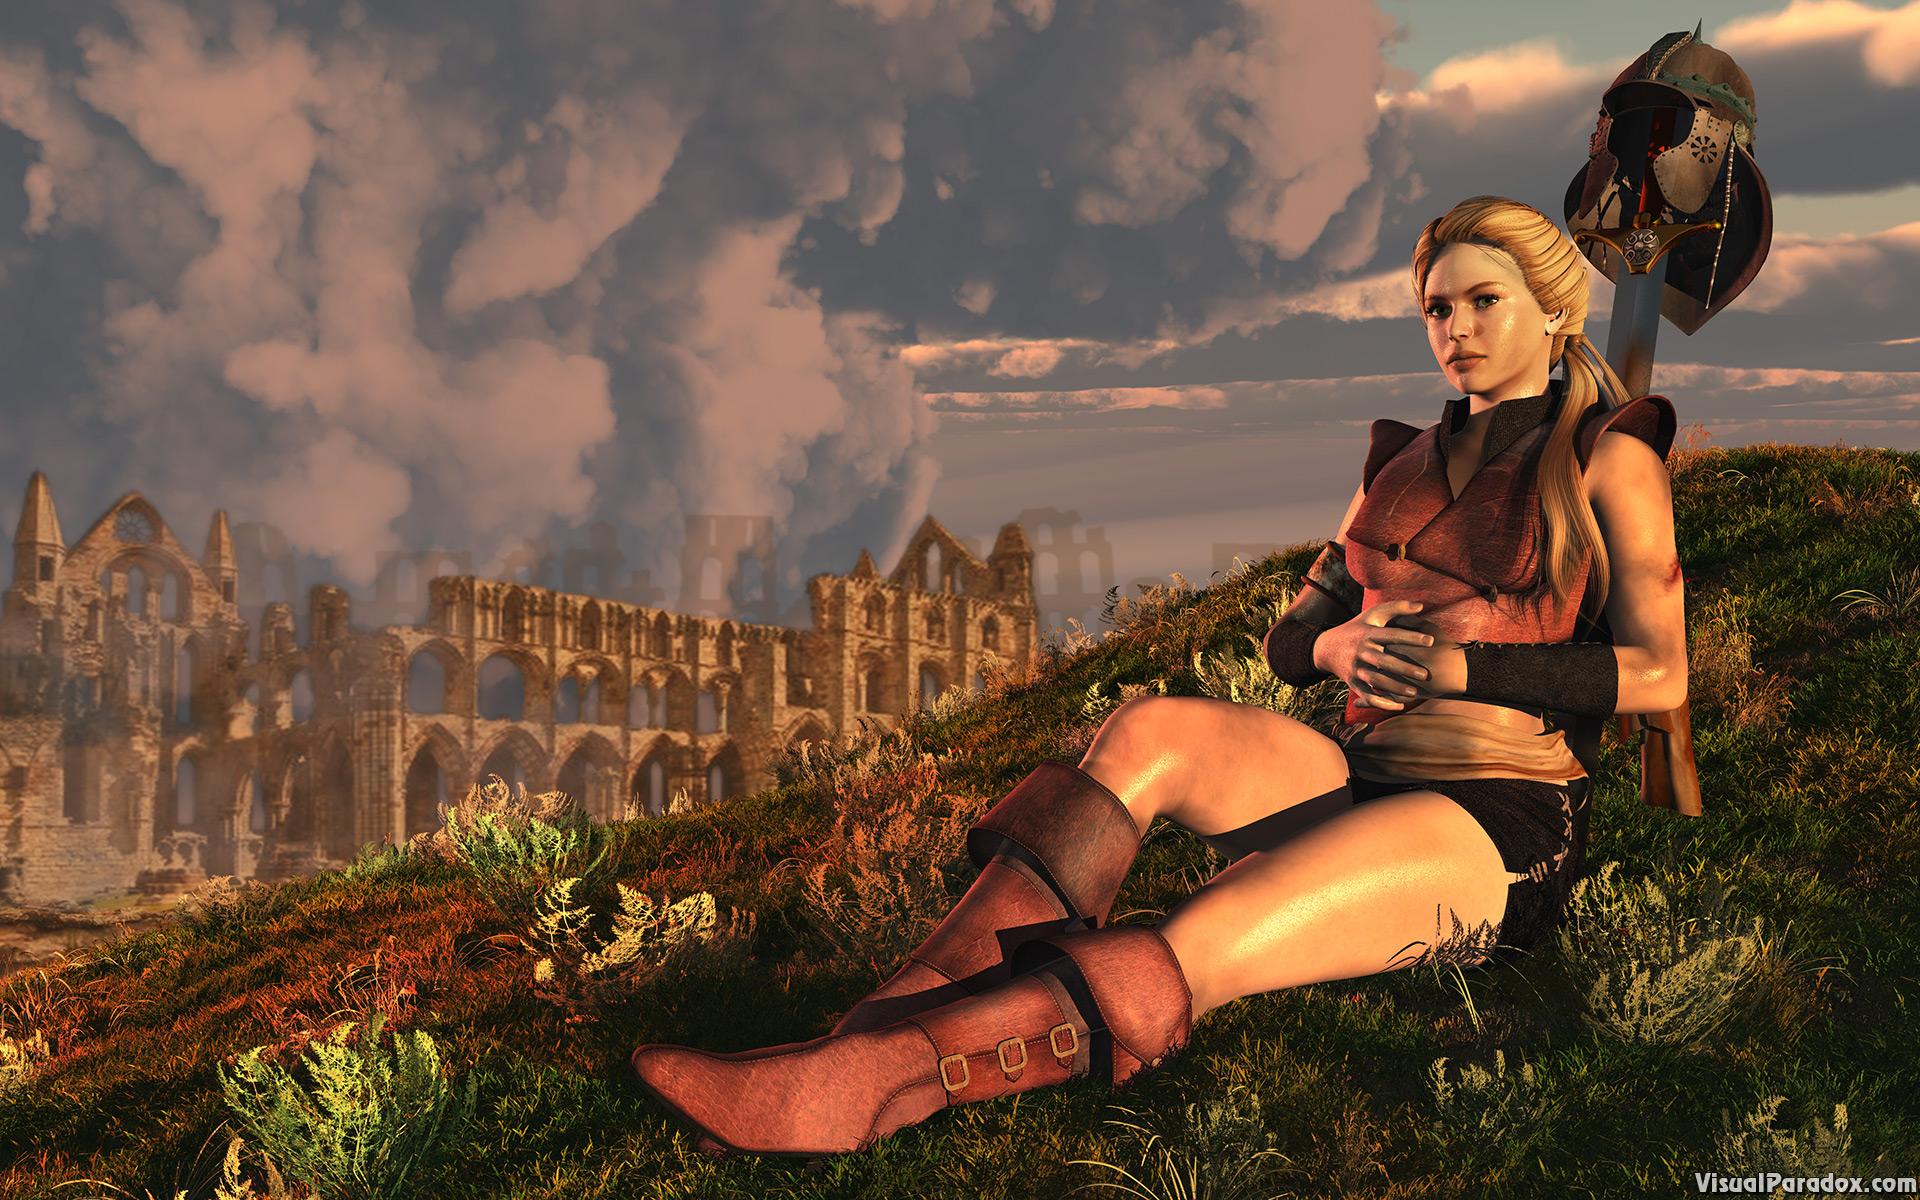 abbey, adult, aggressive, ancient, architecture, armor, armour, attractive, barbarian, battle, beautiful, beauty, building, castle, cathedral, caucasian, church, city, complete, danger, dangerous, elegance, face, fantasy, female, fight, girl, glisten, grass, history, hot, knight, lady, leather, lounge, mission, old, outdoor, person, portrait, pretty, quest, rest, retro, ruins, sack, sexy, sky, steel, sweat, sword, town, war, warrior, weapon, woman, young, 3d, wallpaper